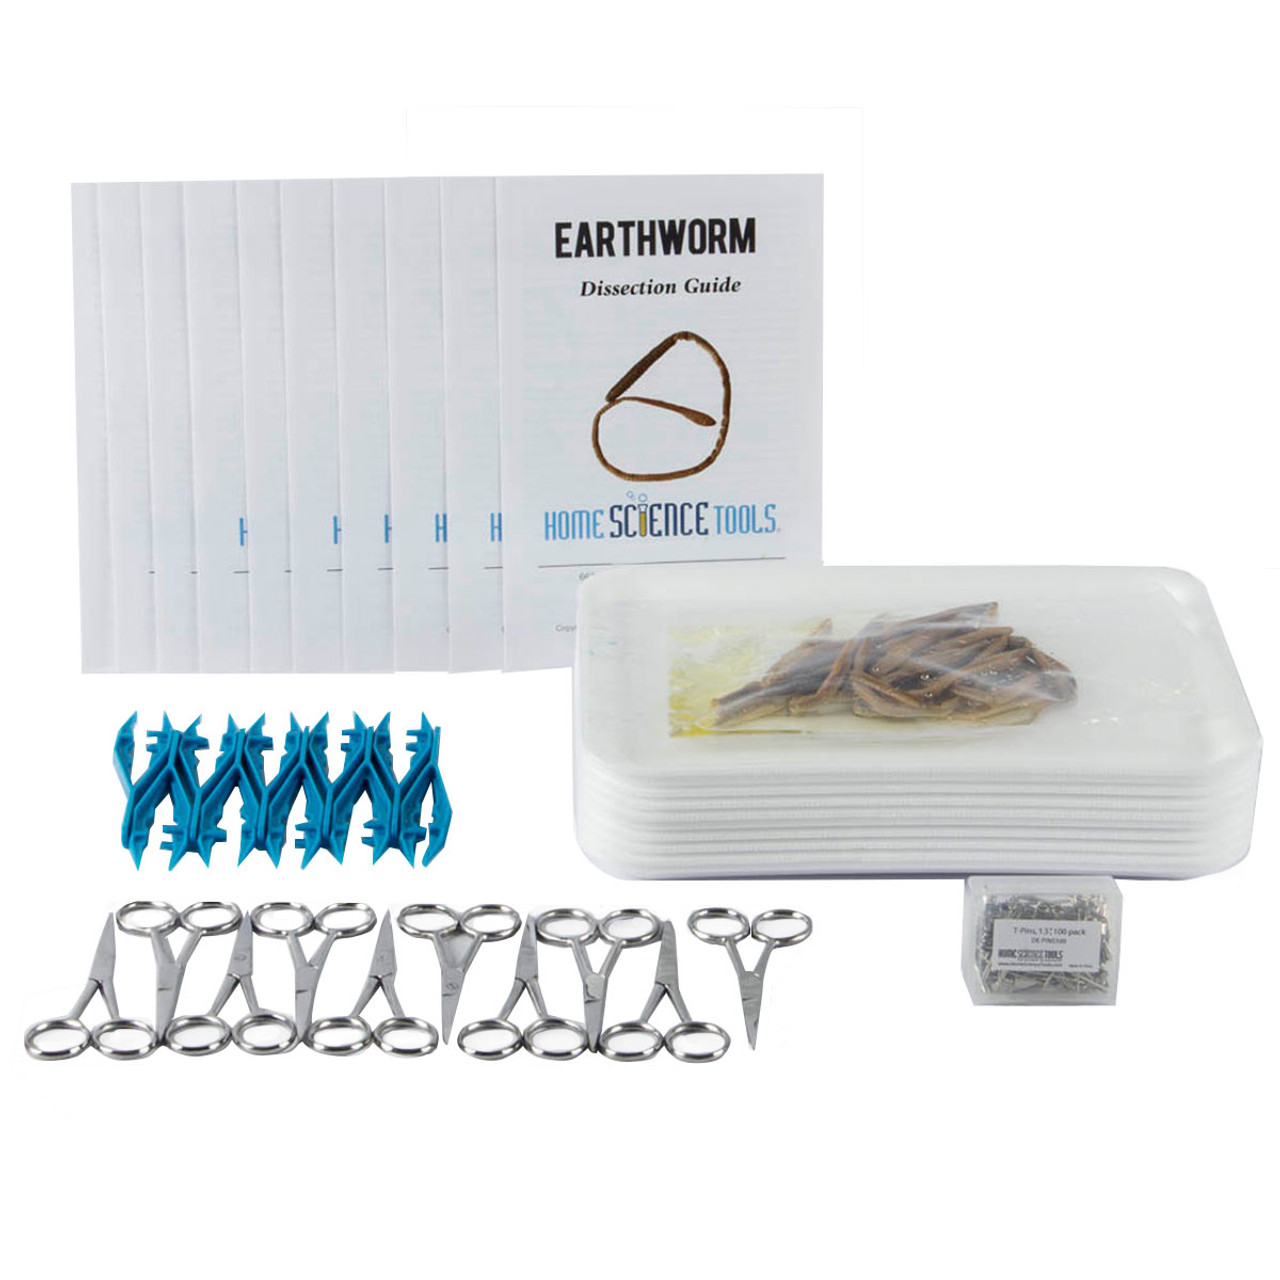 Classroom Worm Dissection Kit